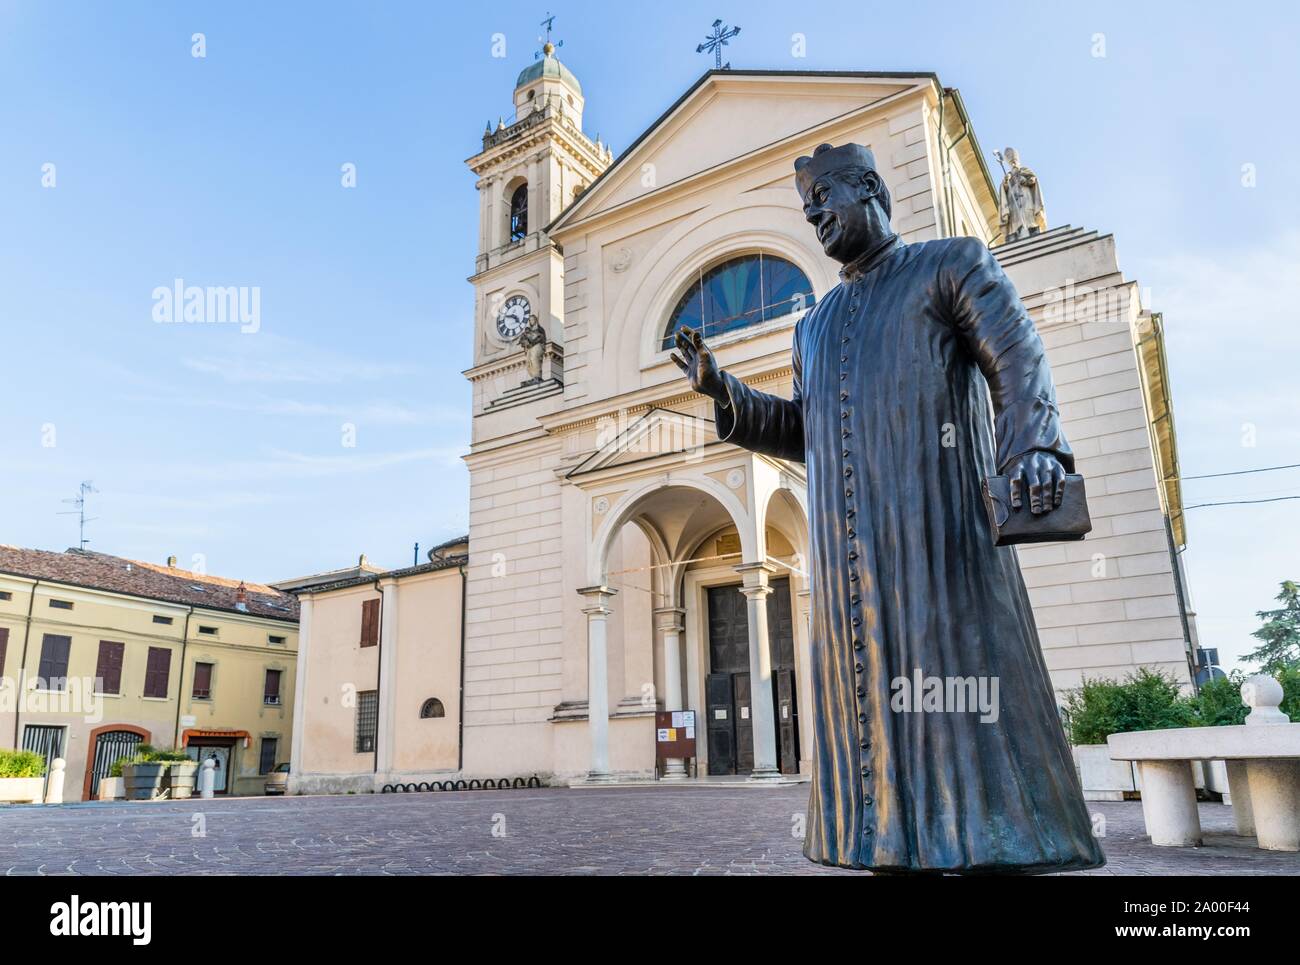 Statue of Don Camillo in Piazza Giacomo Matteotti in front of the Church of Santa Maria Nascente, location of the films of Don Camillo and Peppone Stock Photo